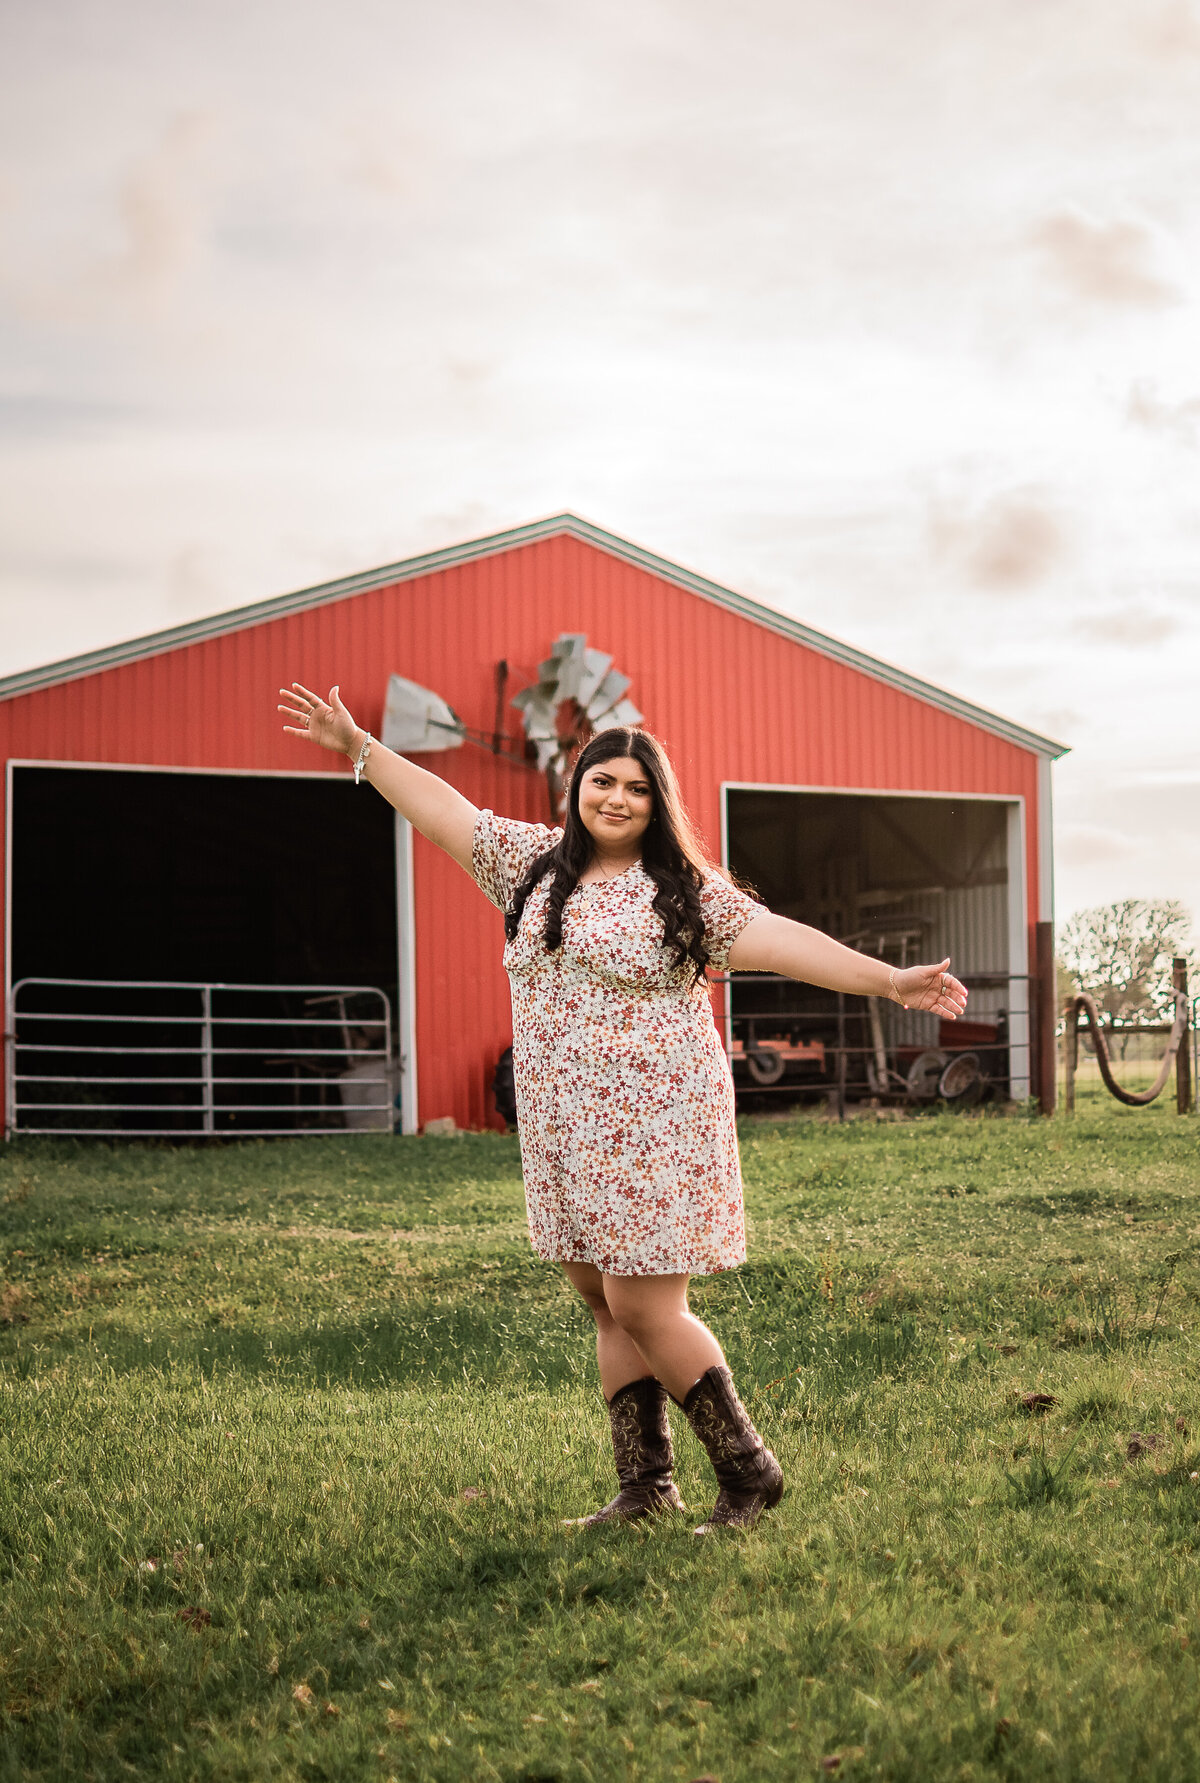 A Houston senior stands in front of a barn with her arms outstretched in Santa Fe, TX.